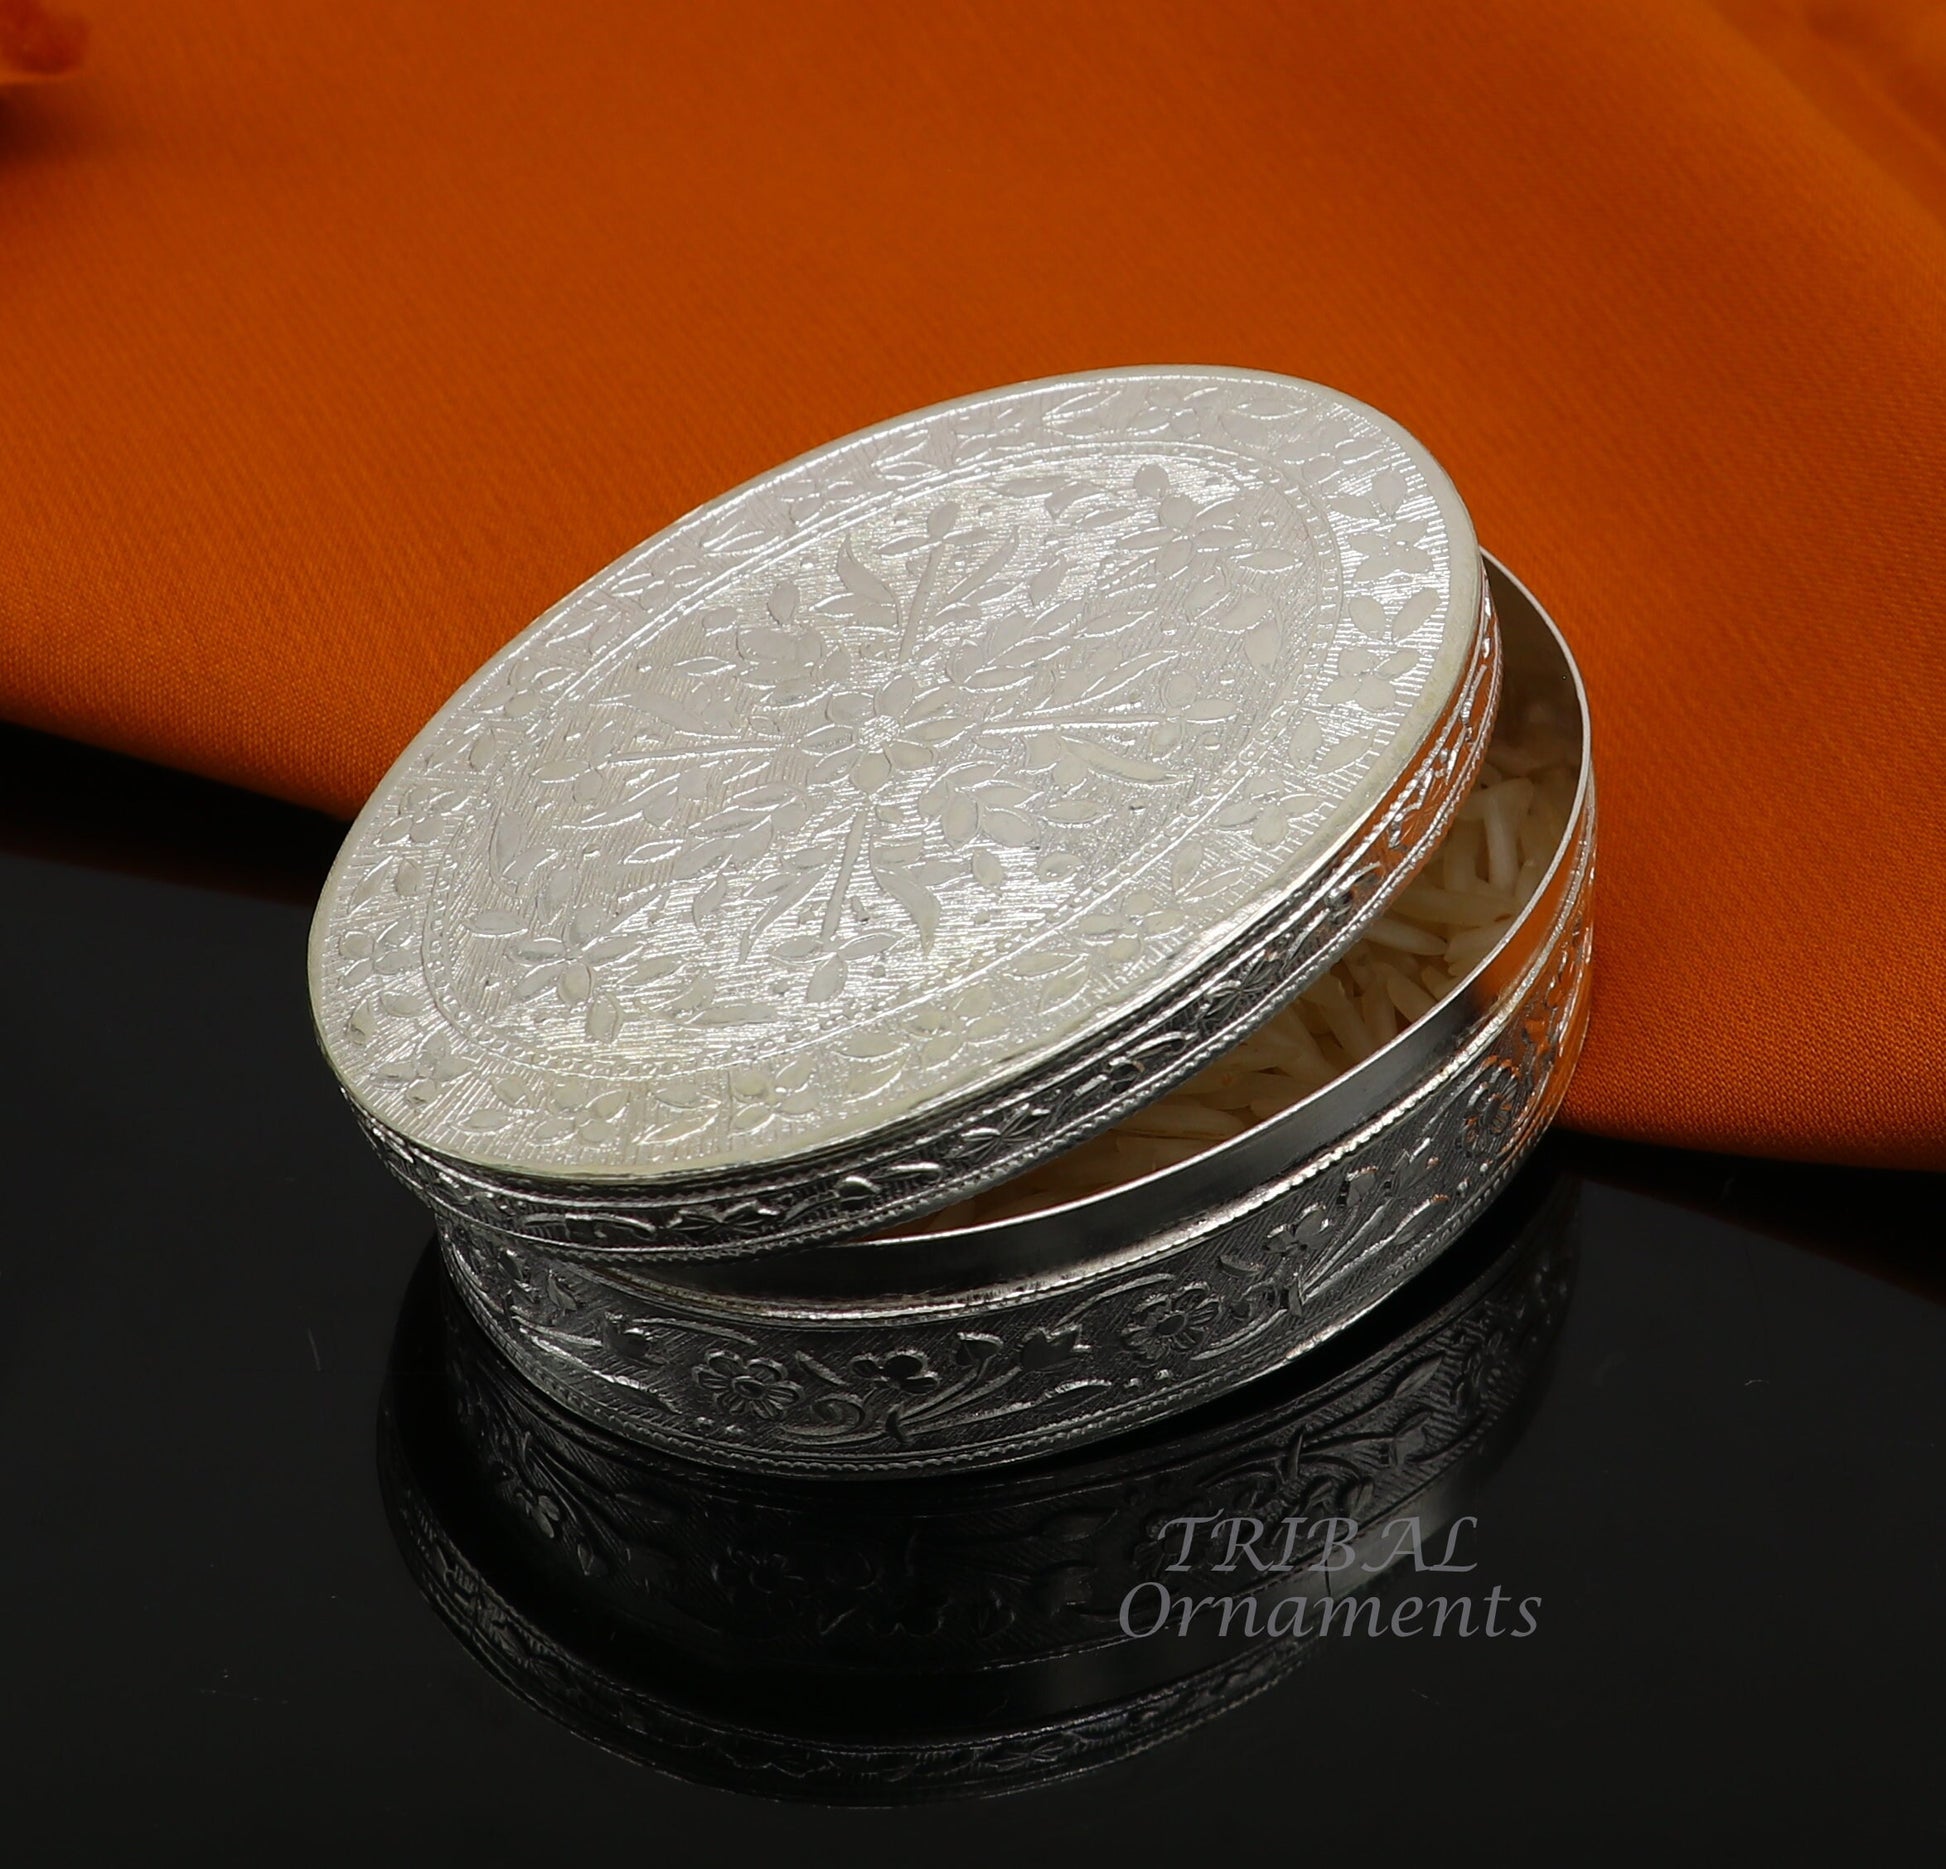 925 silver handmade oval shape trinket box brides jewelry box or dry fruit box candy box luxury gifting ideas or unique collection stb409 - TRIBAL ORNAMENTS